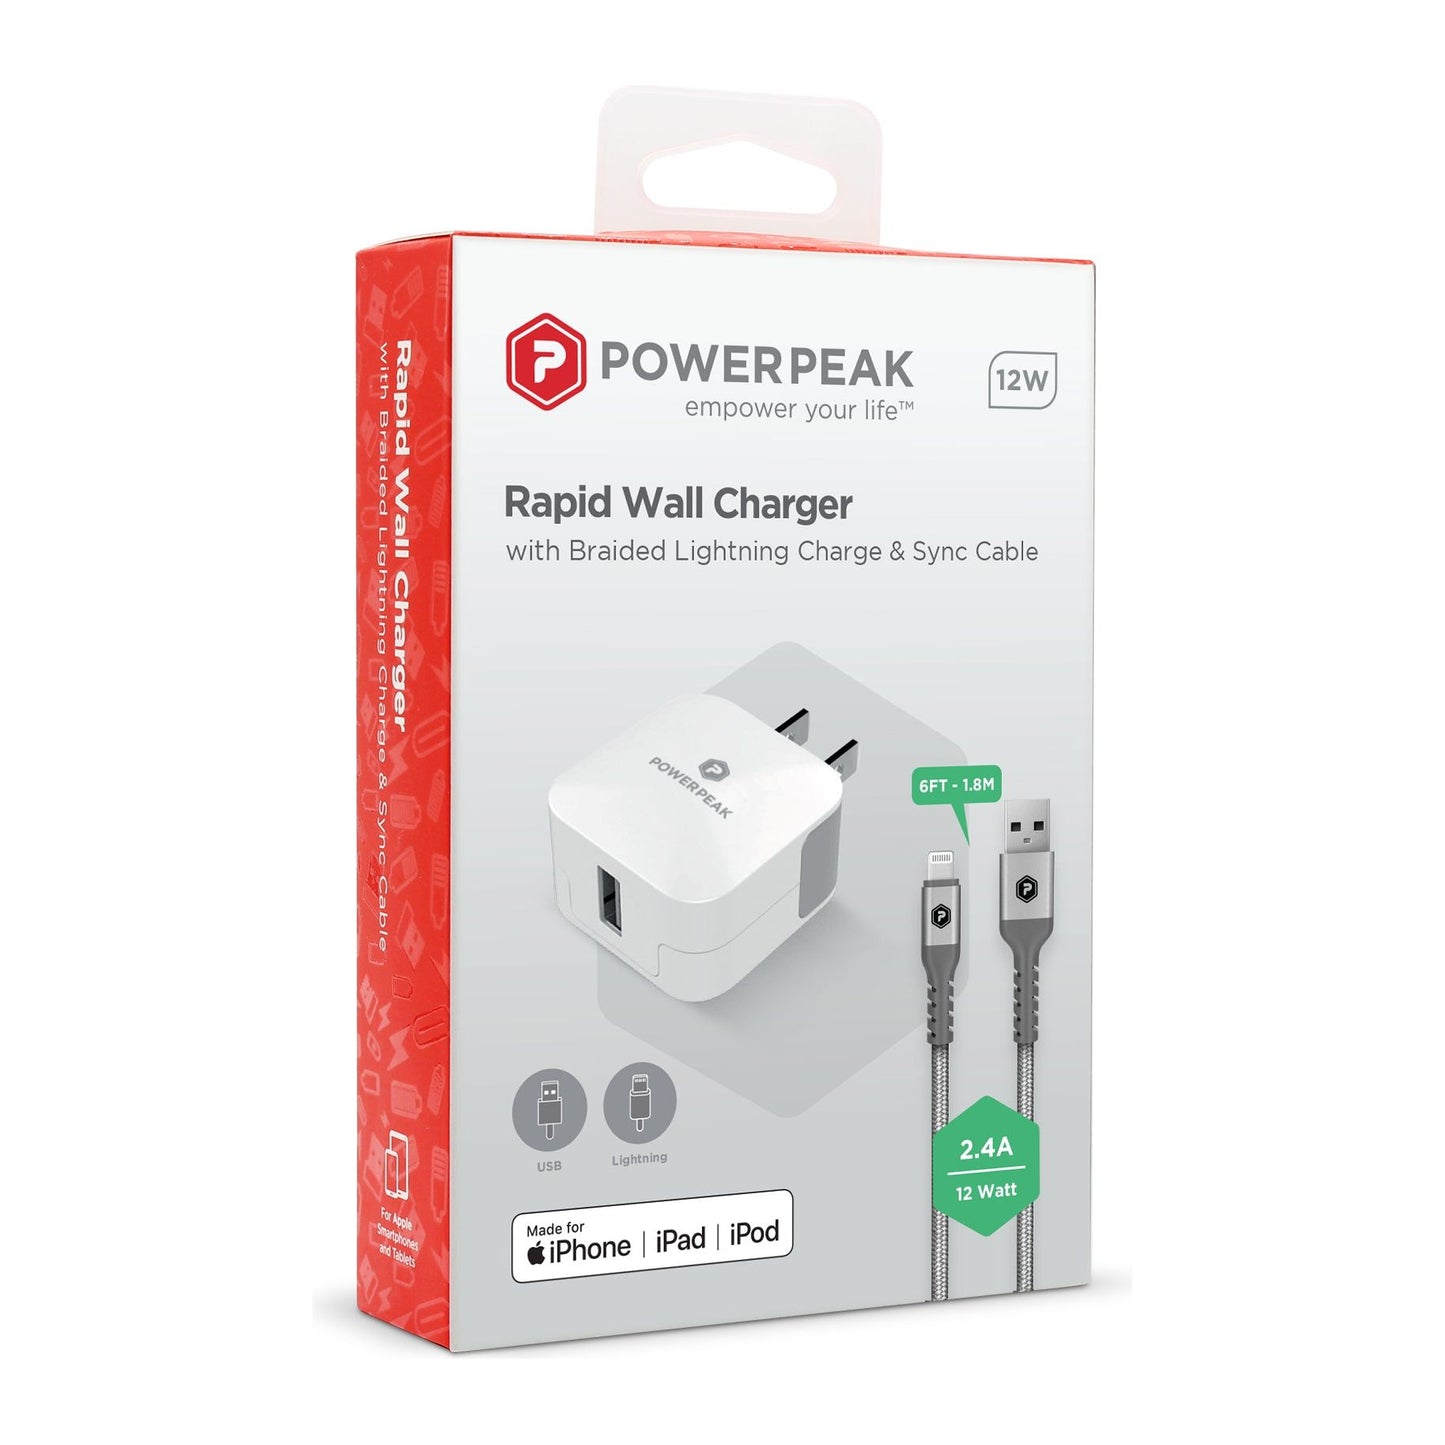 POWERPEAK SINGLE PORT RAPID WALL CHARGER WITH LIGHTNING CABLE {12 WATTS}